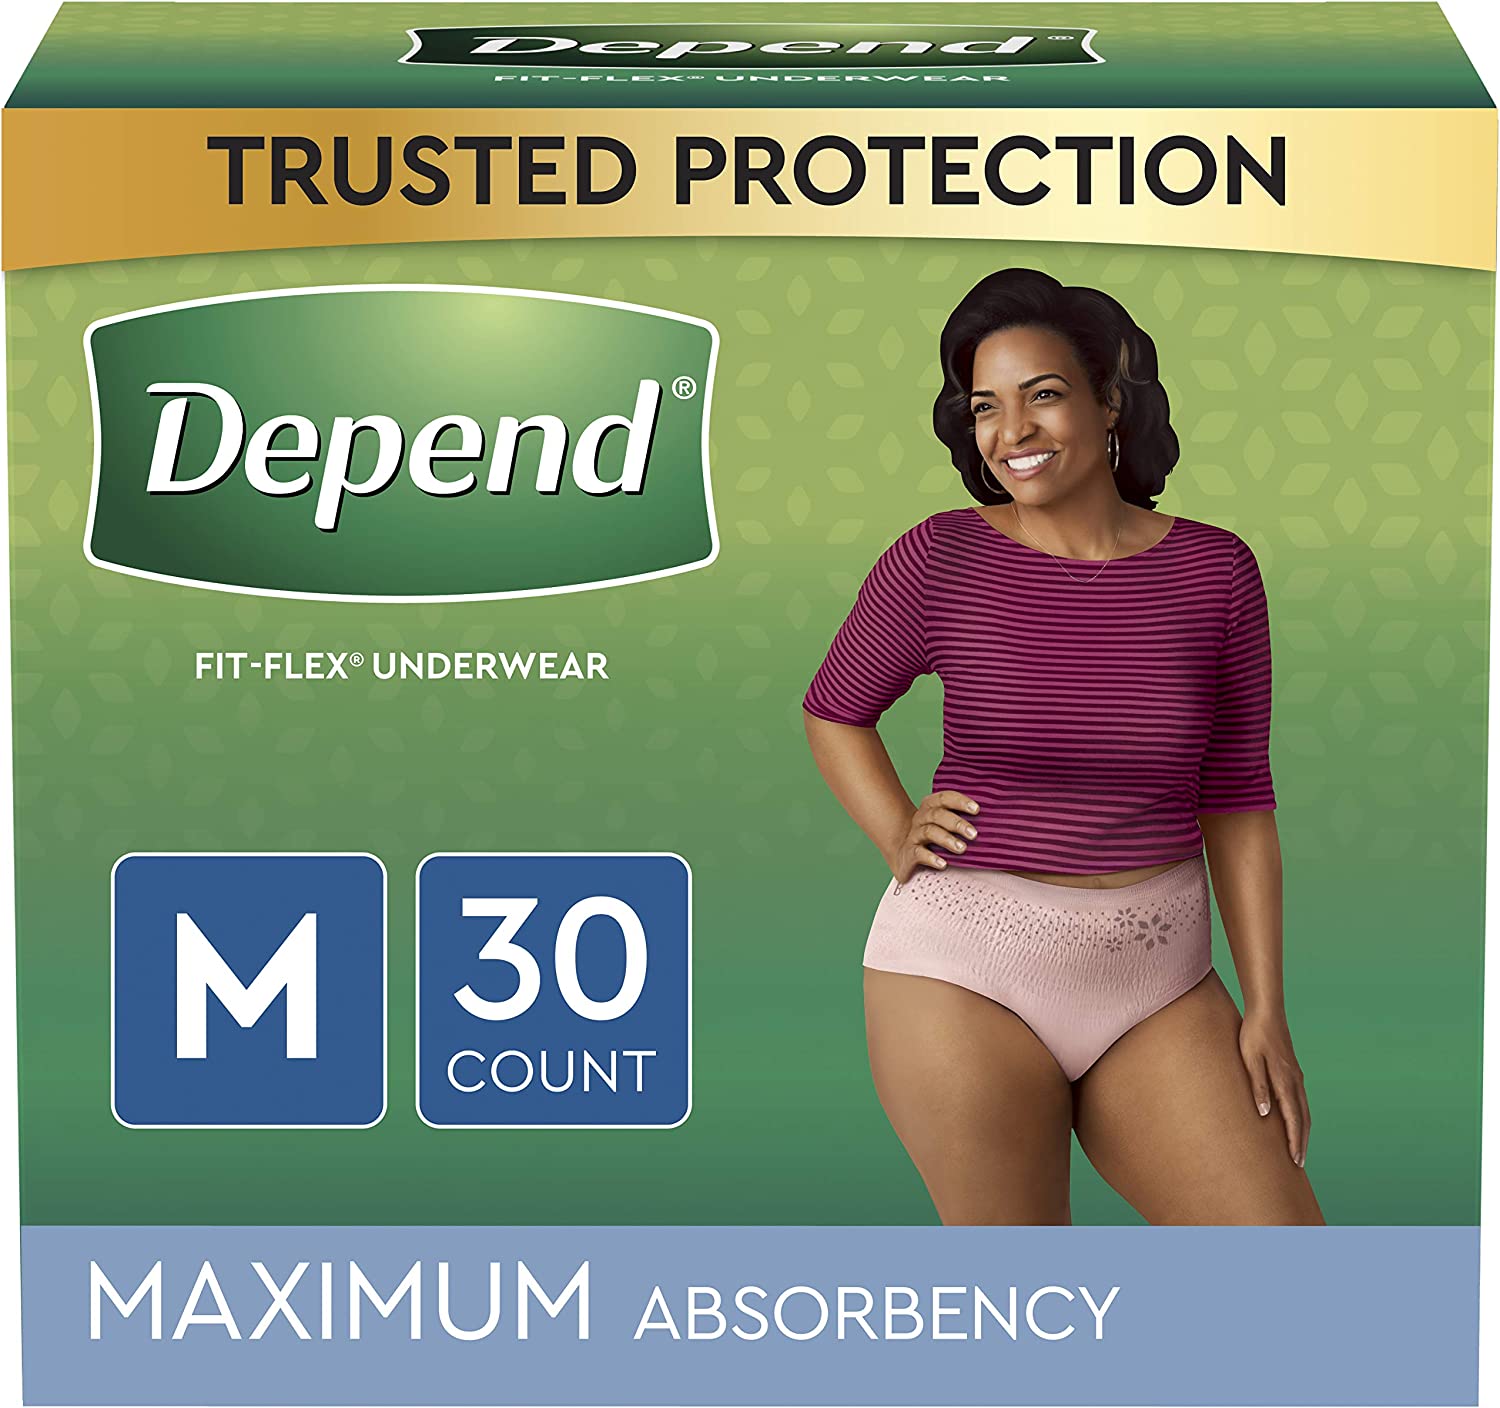 Depend Fit-Flex Adult Incontinence Underwear for Women, Disposable, Maximum Absorbency, Medium, Blush, 30 Count